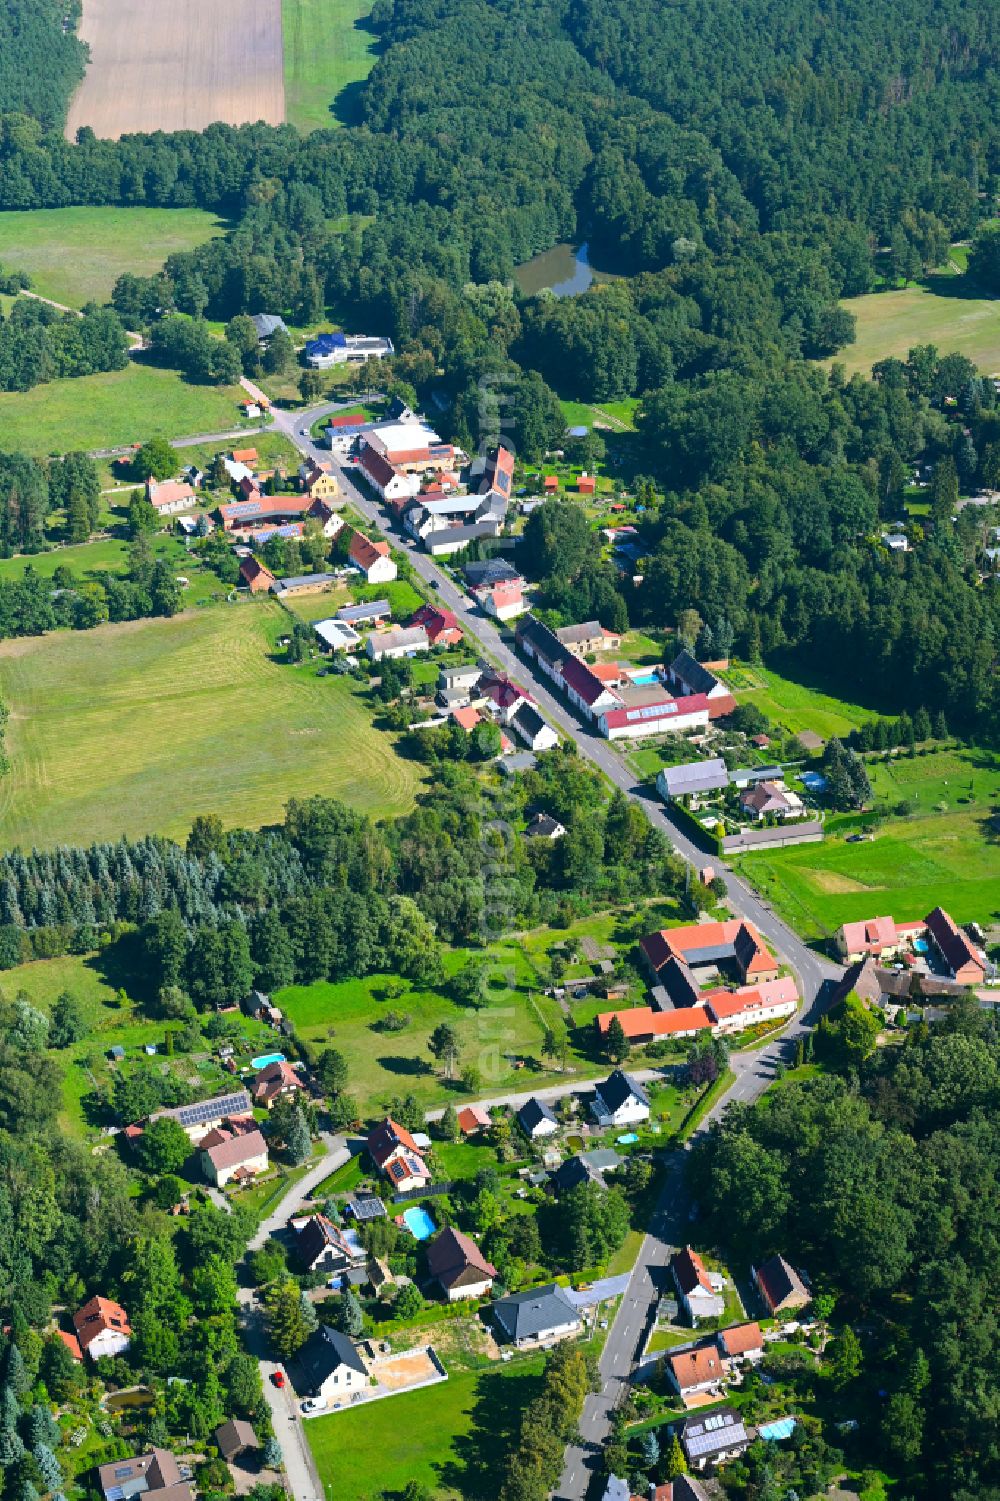 Aerial photograph Möllensdorf - Village - view on the edge of forested areas in Möllensdorf in the state Saxony-Anhalt, Germany